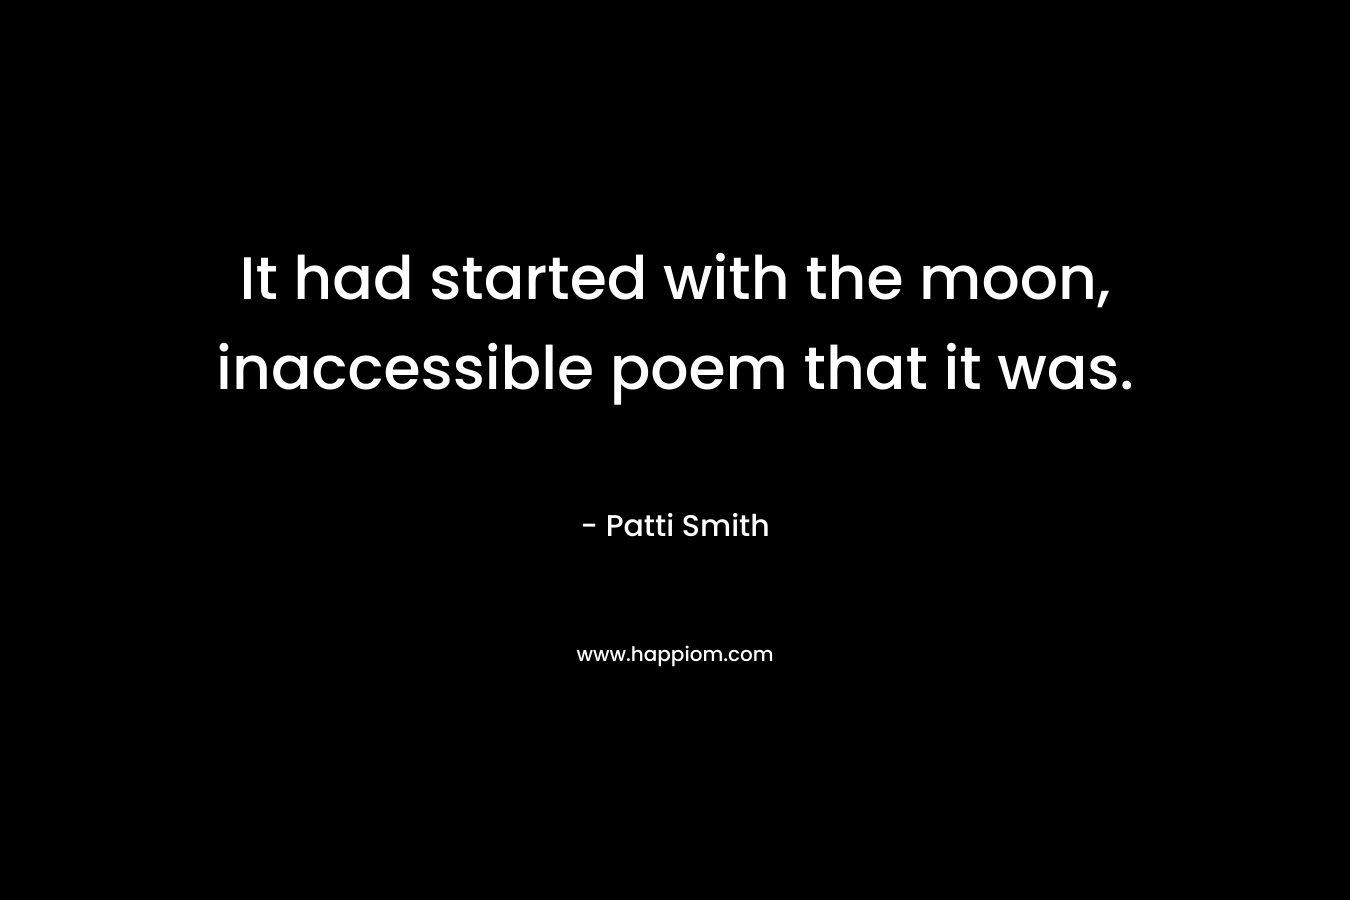 It had started with the moon, inaccessible poem that it was.